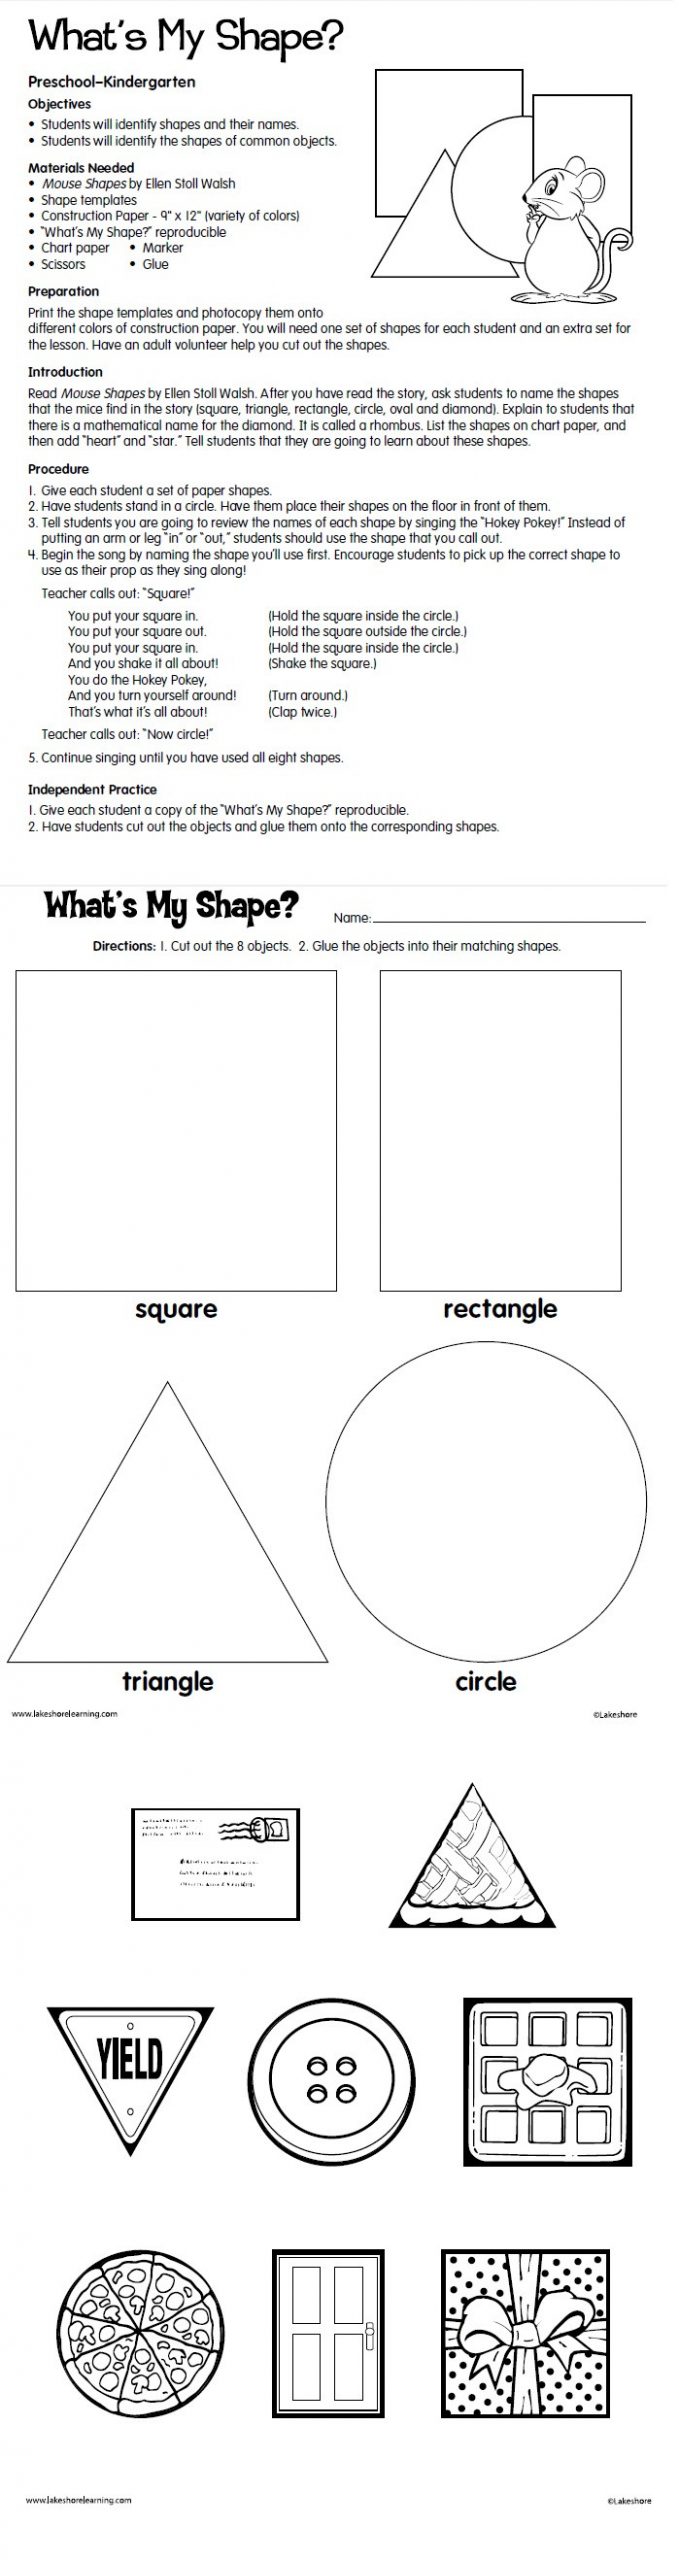 Shapes Lesson Plan What’s My Shape Lesson Plan From Lakeshore Learning